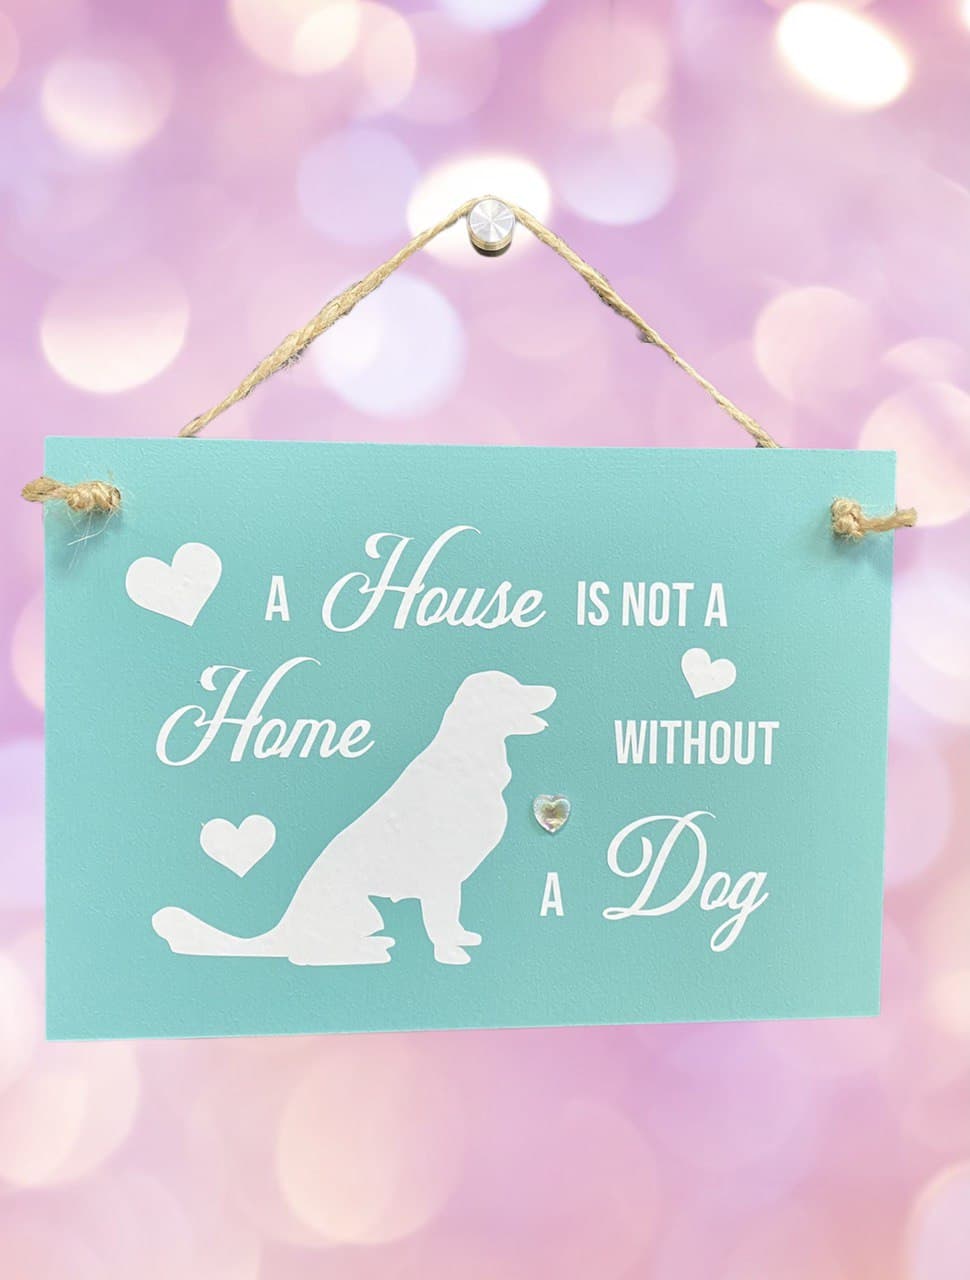 House without a dog